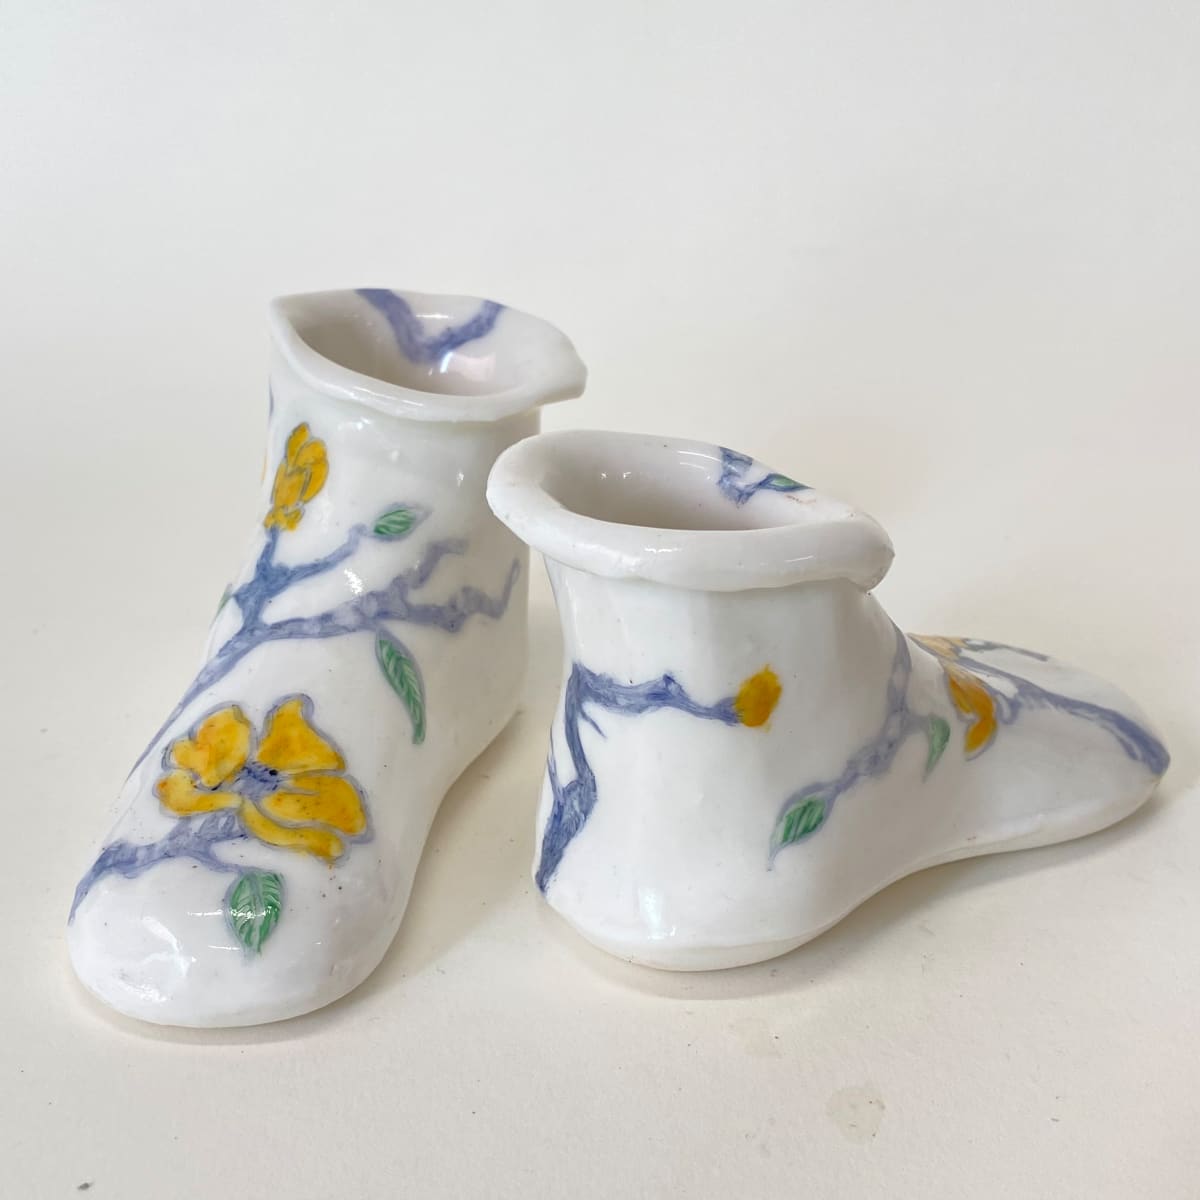 Yellow Flowers On Twisted Branches by annekwasner@gmail.com  Image: A pair of slip cast porcelain shoes, flowers hand painted with on-glaze.